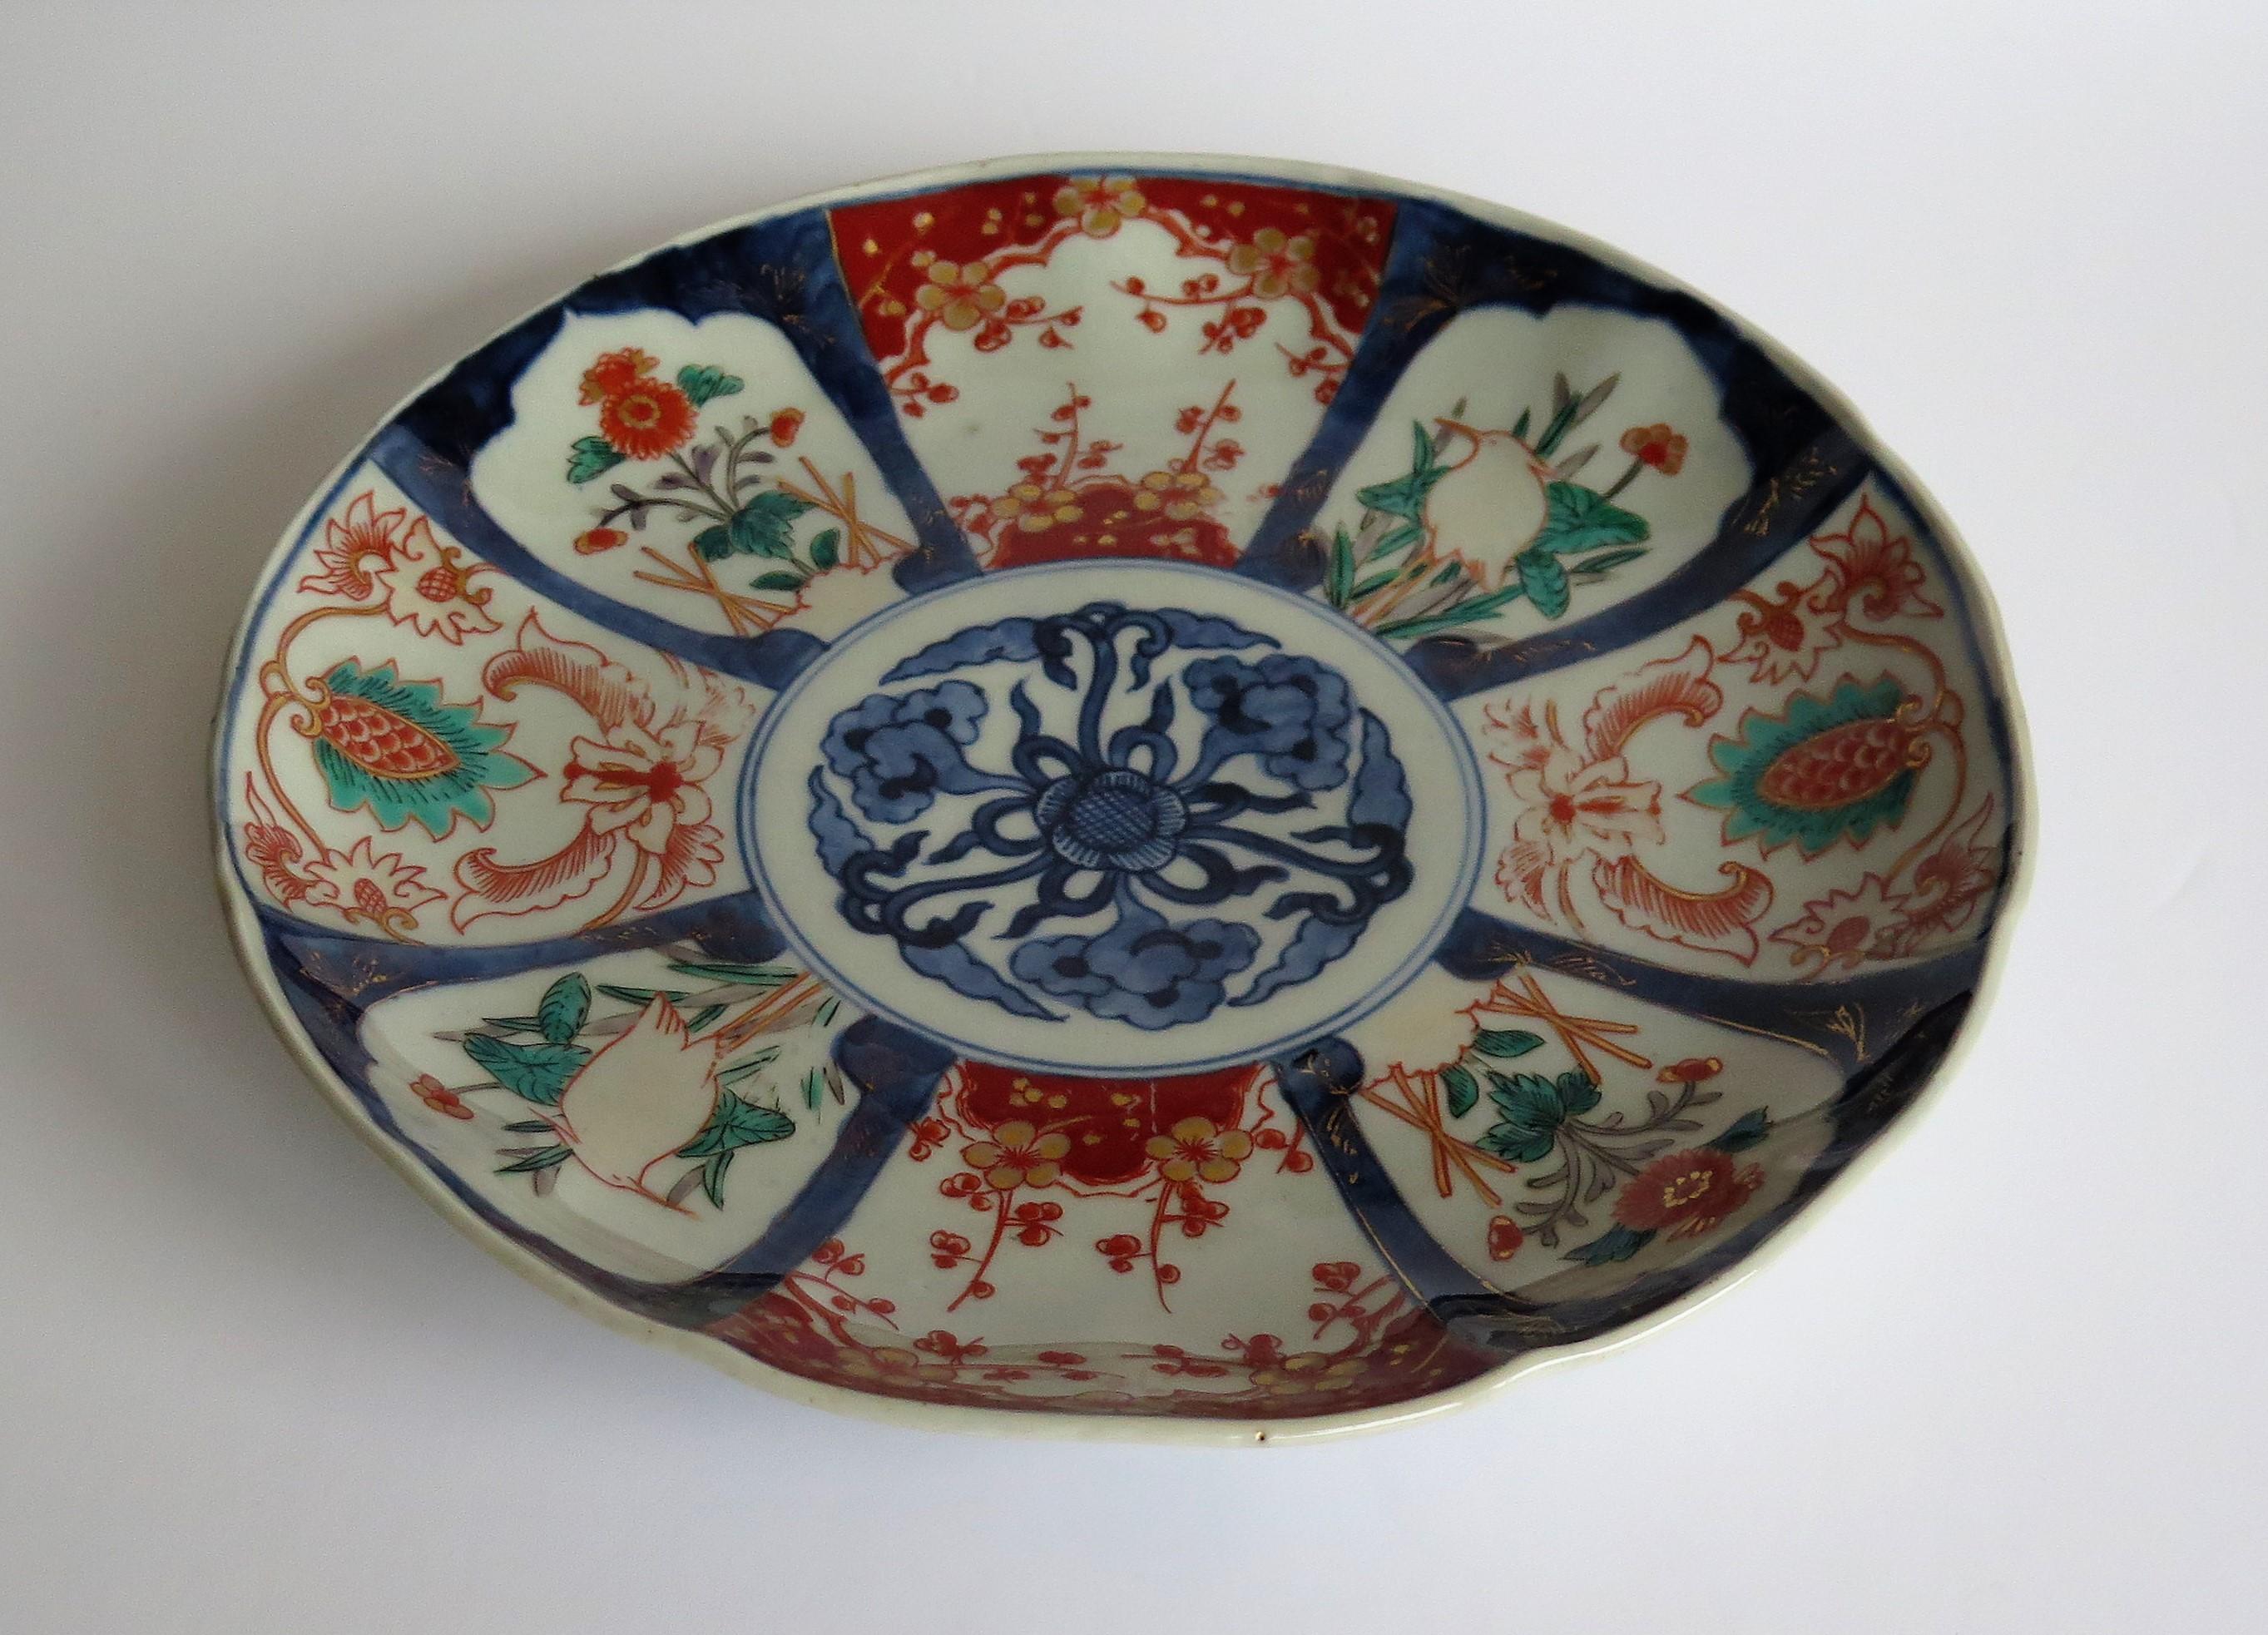 Japanese Porcelain Large Plate or Hand Painted Imari, 19th Century Meiji Period  4